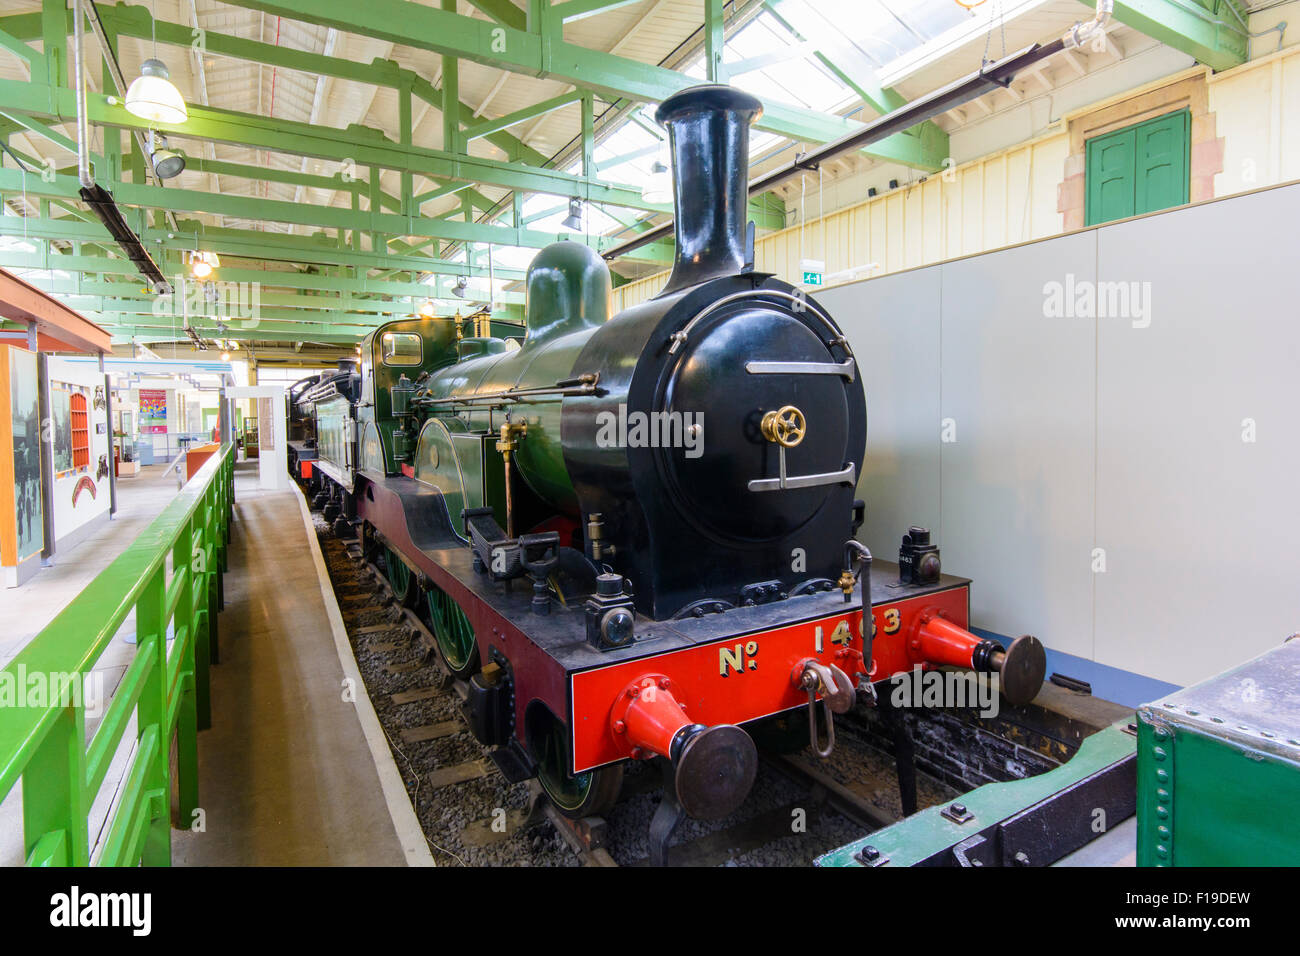 Steam engine at The Head of Steam Stock Photo